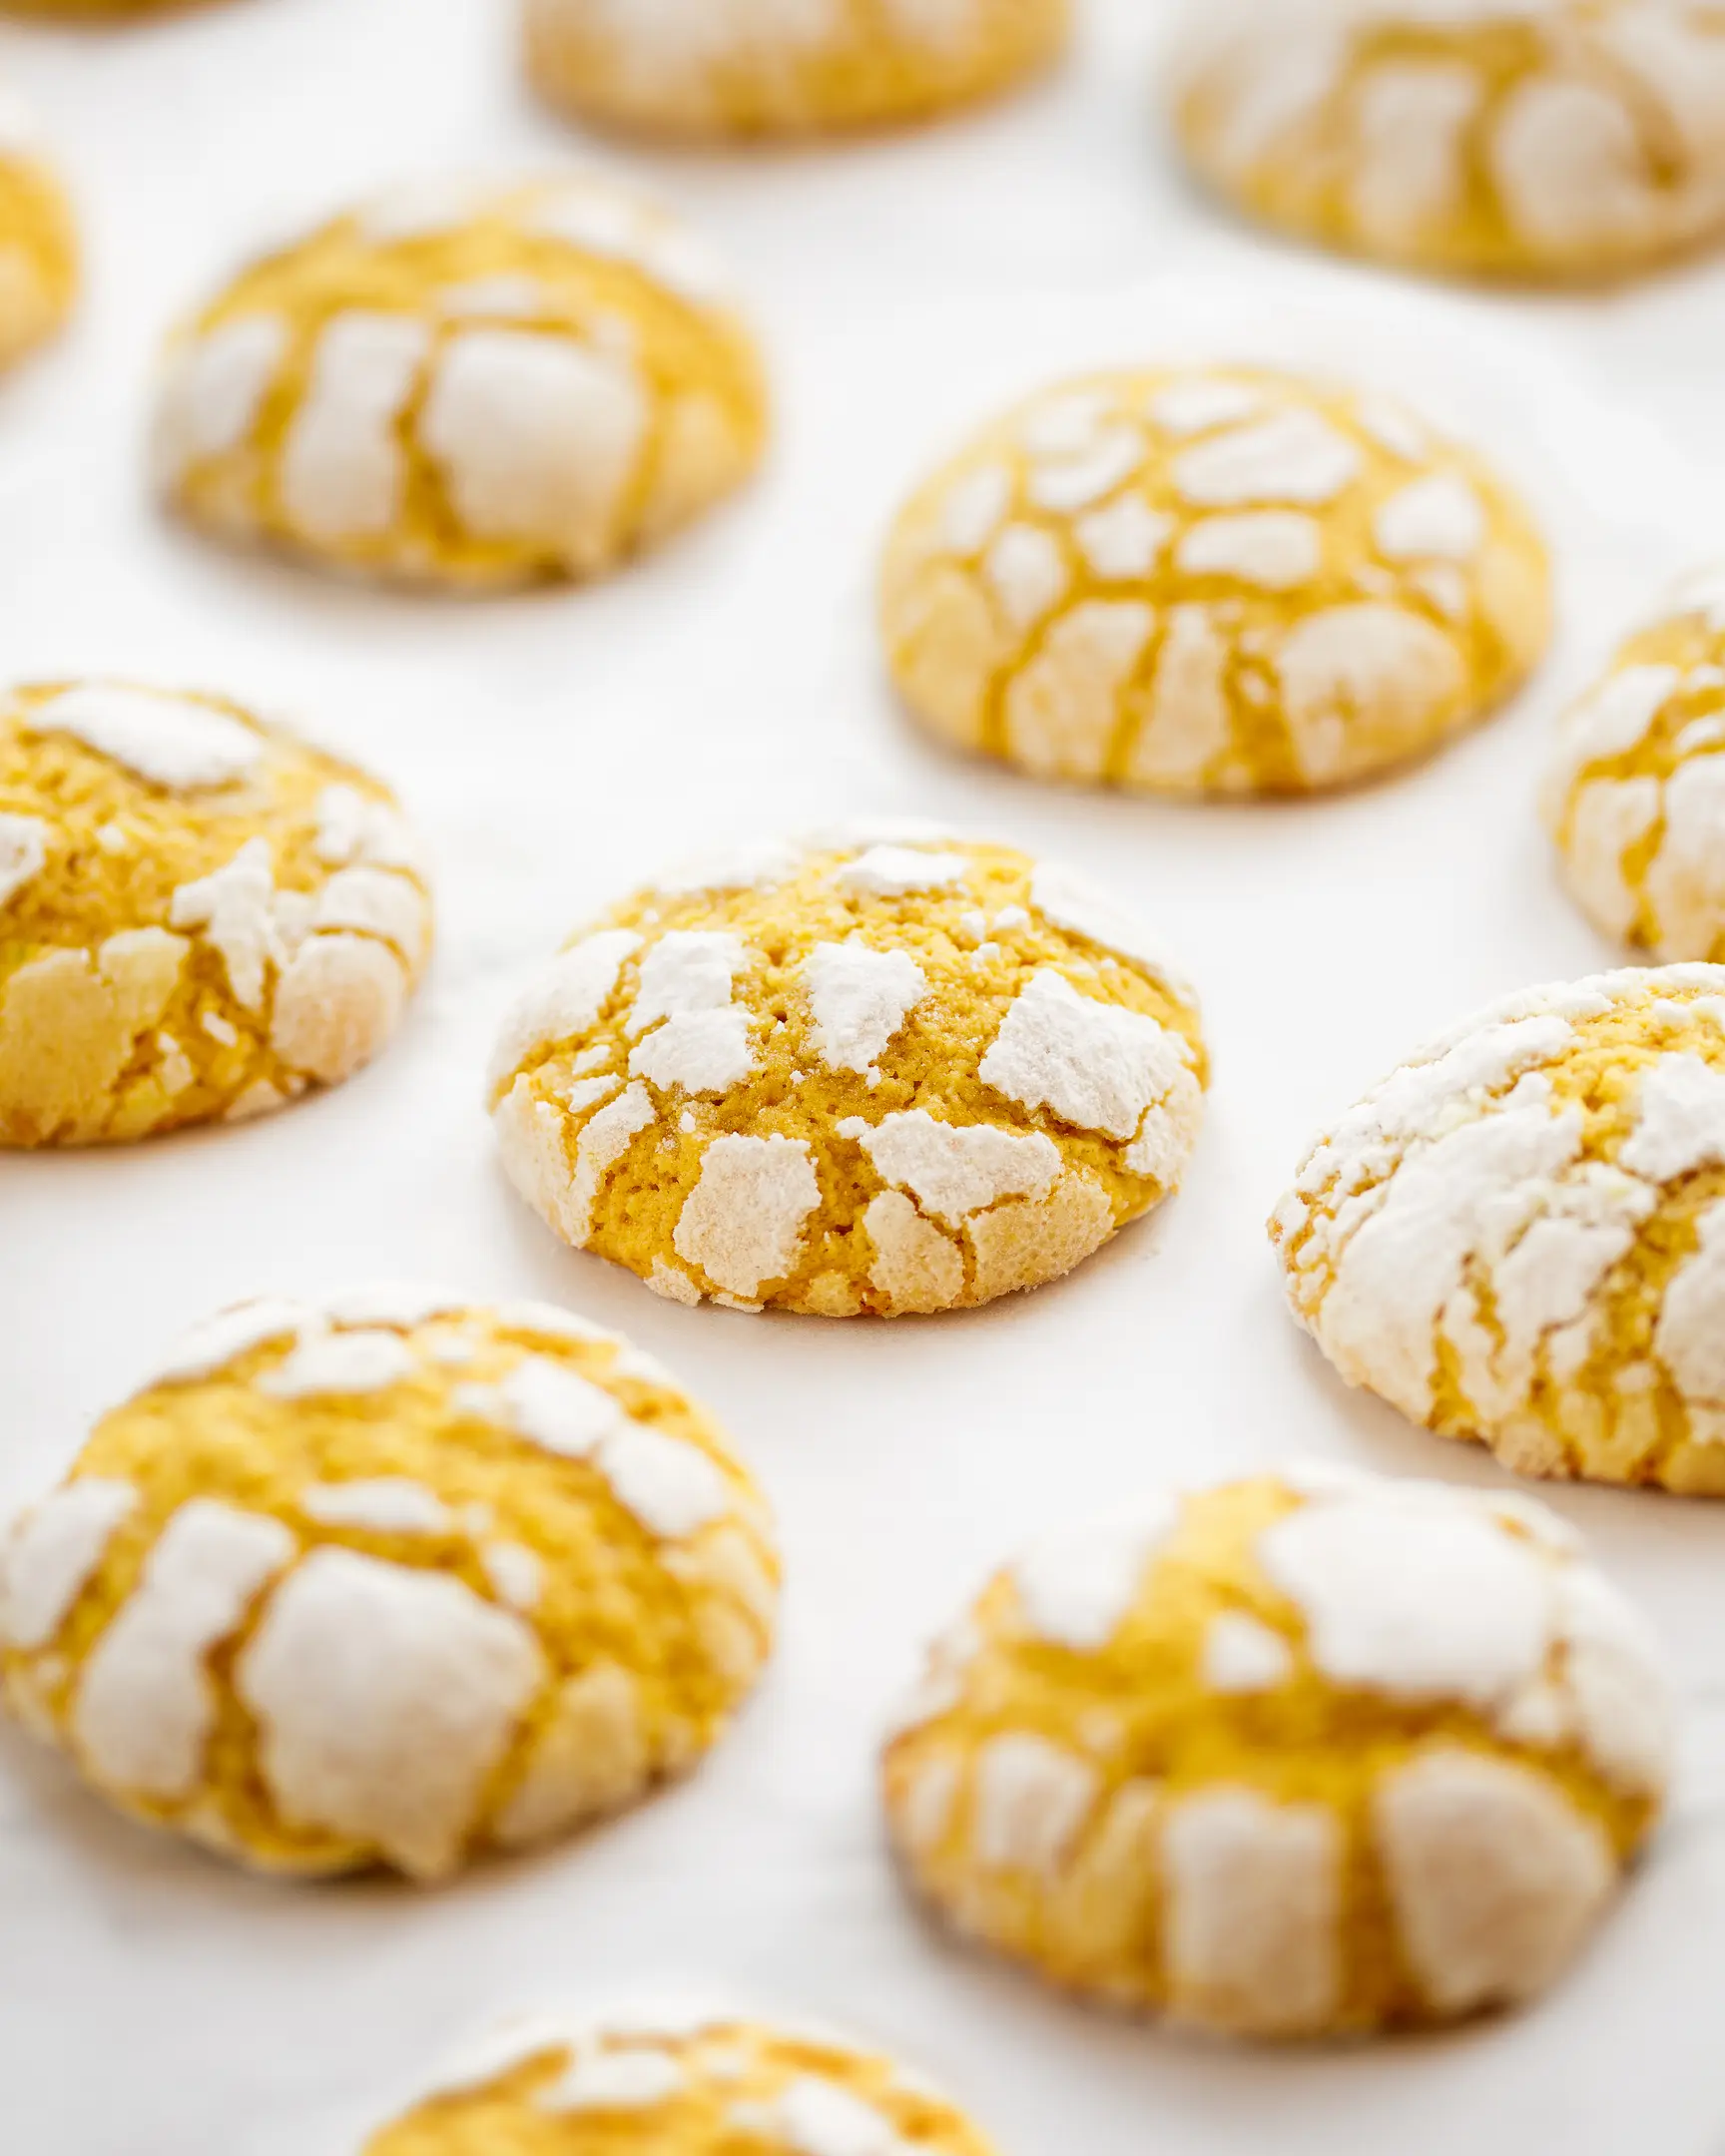 Bright yellow cracked cookies. Bright yellow cookies sprinkled with powdered sugar lie on baking paper in rows.